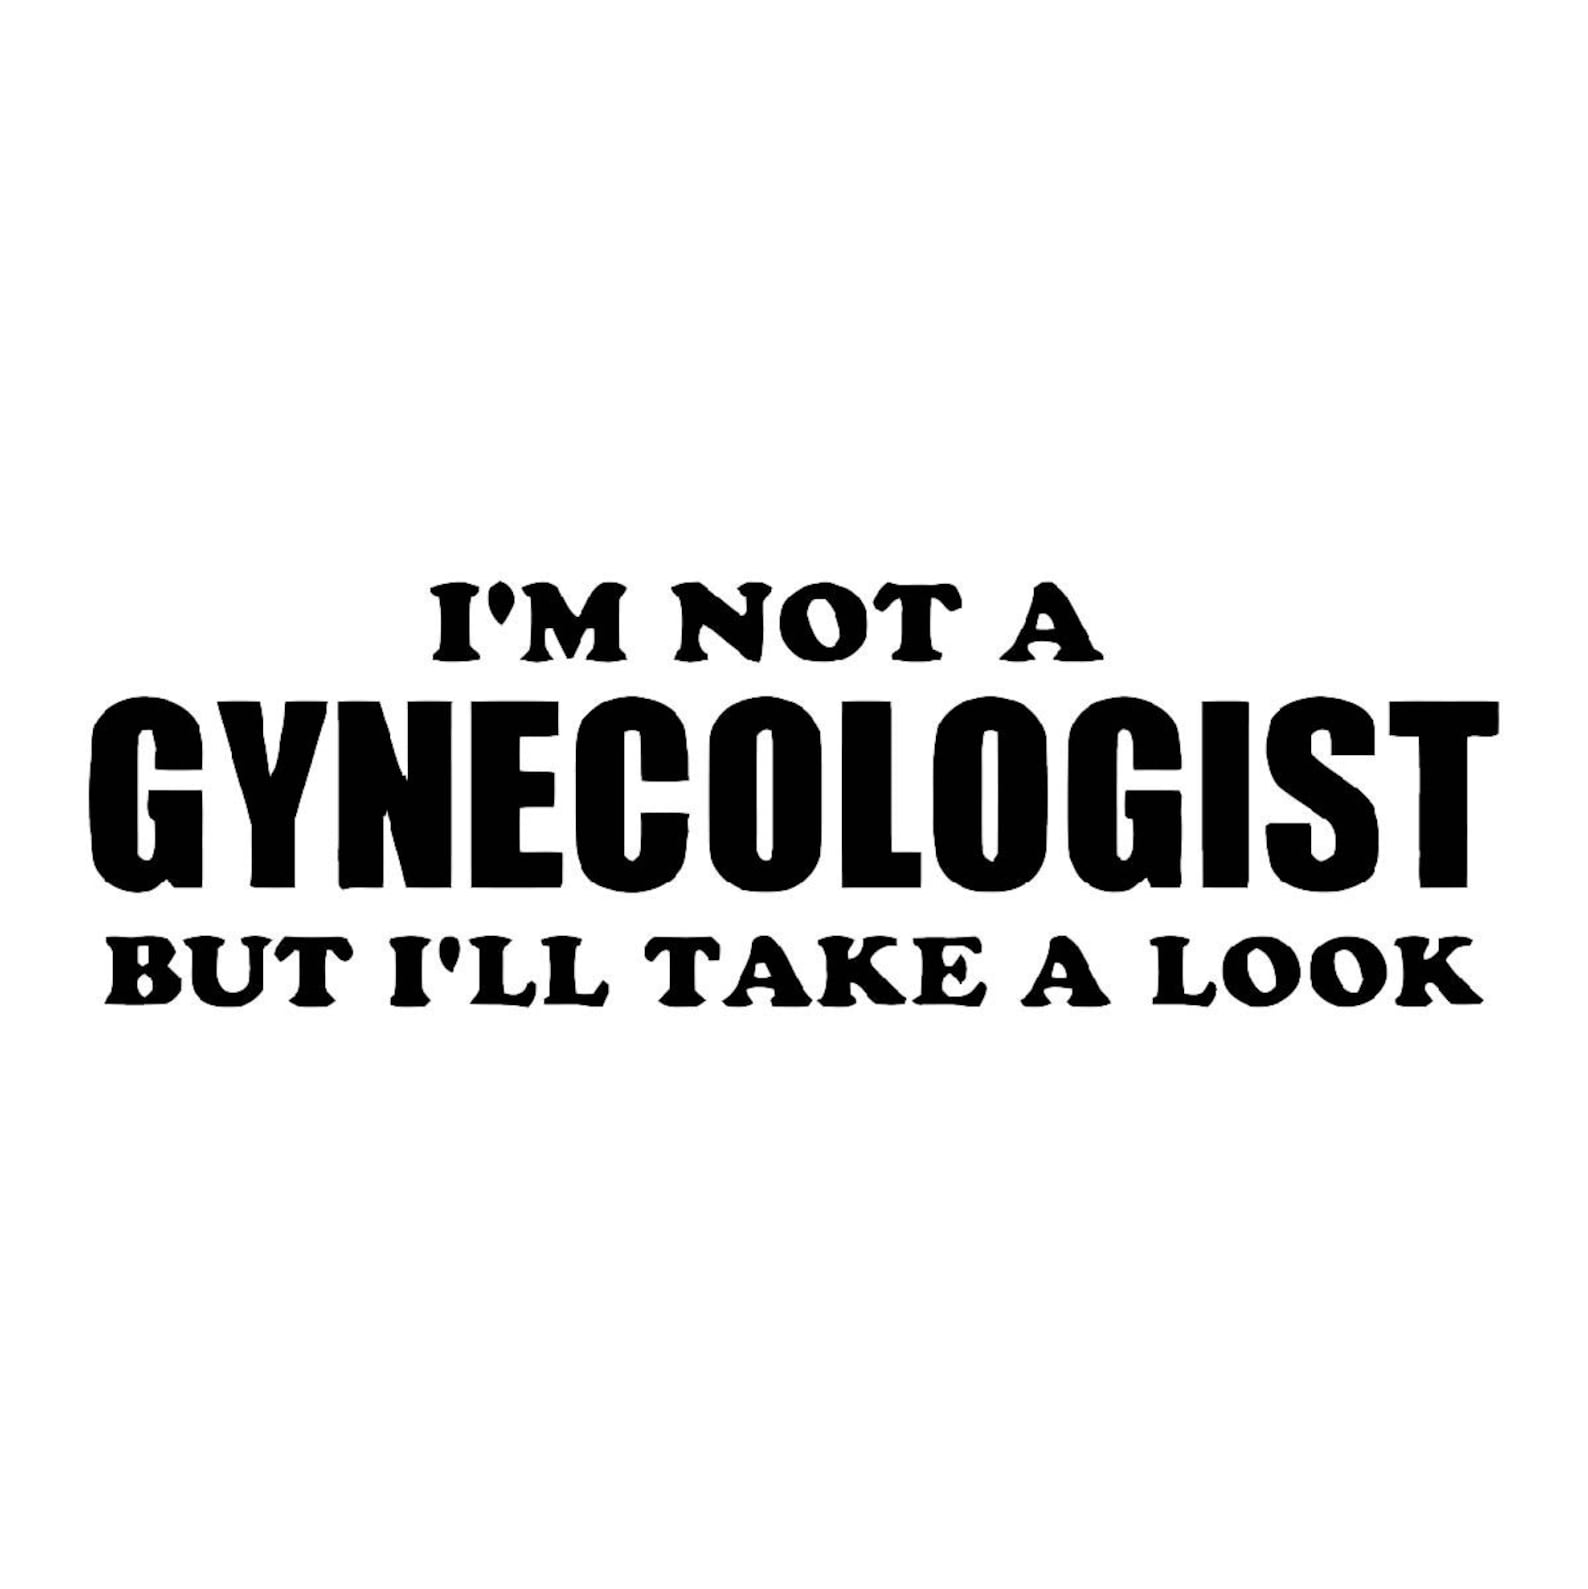 Funny I'm Not A Gynecologist But I'll Take A Look | Etsy